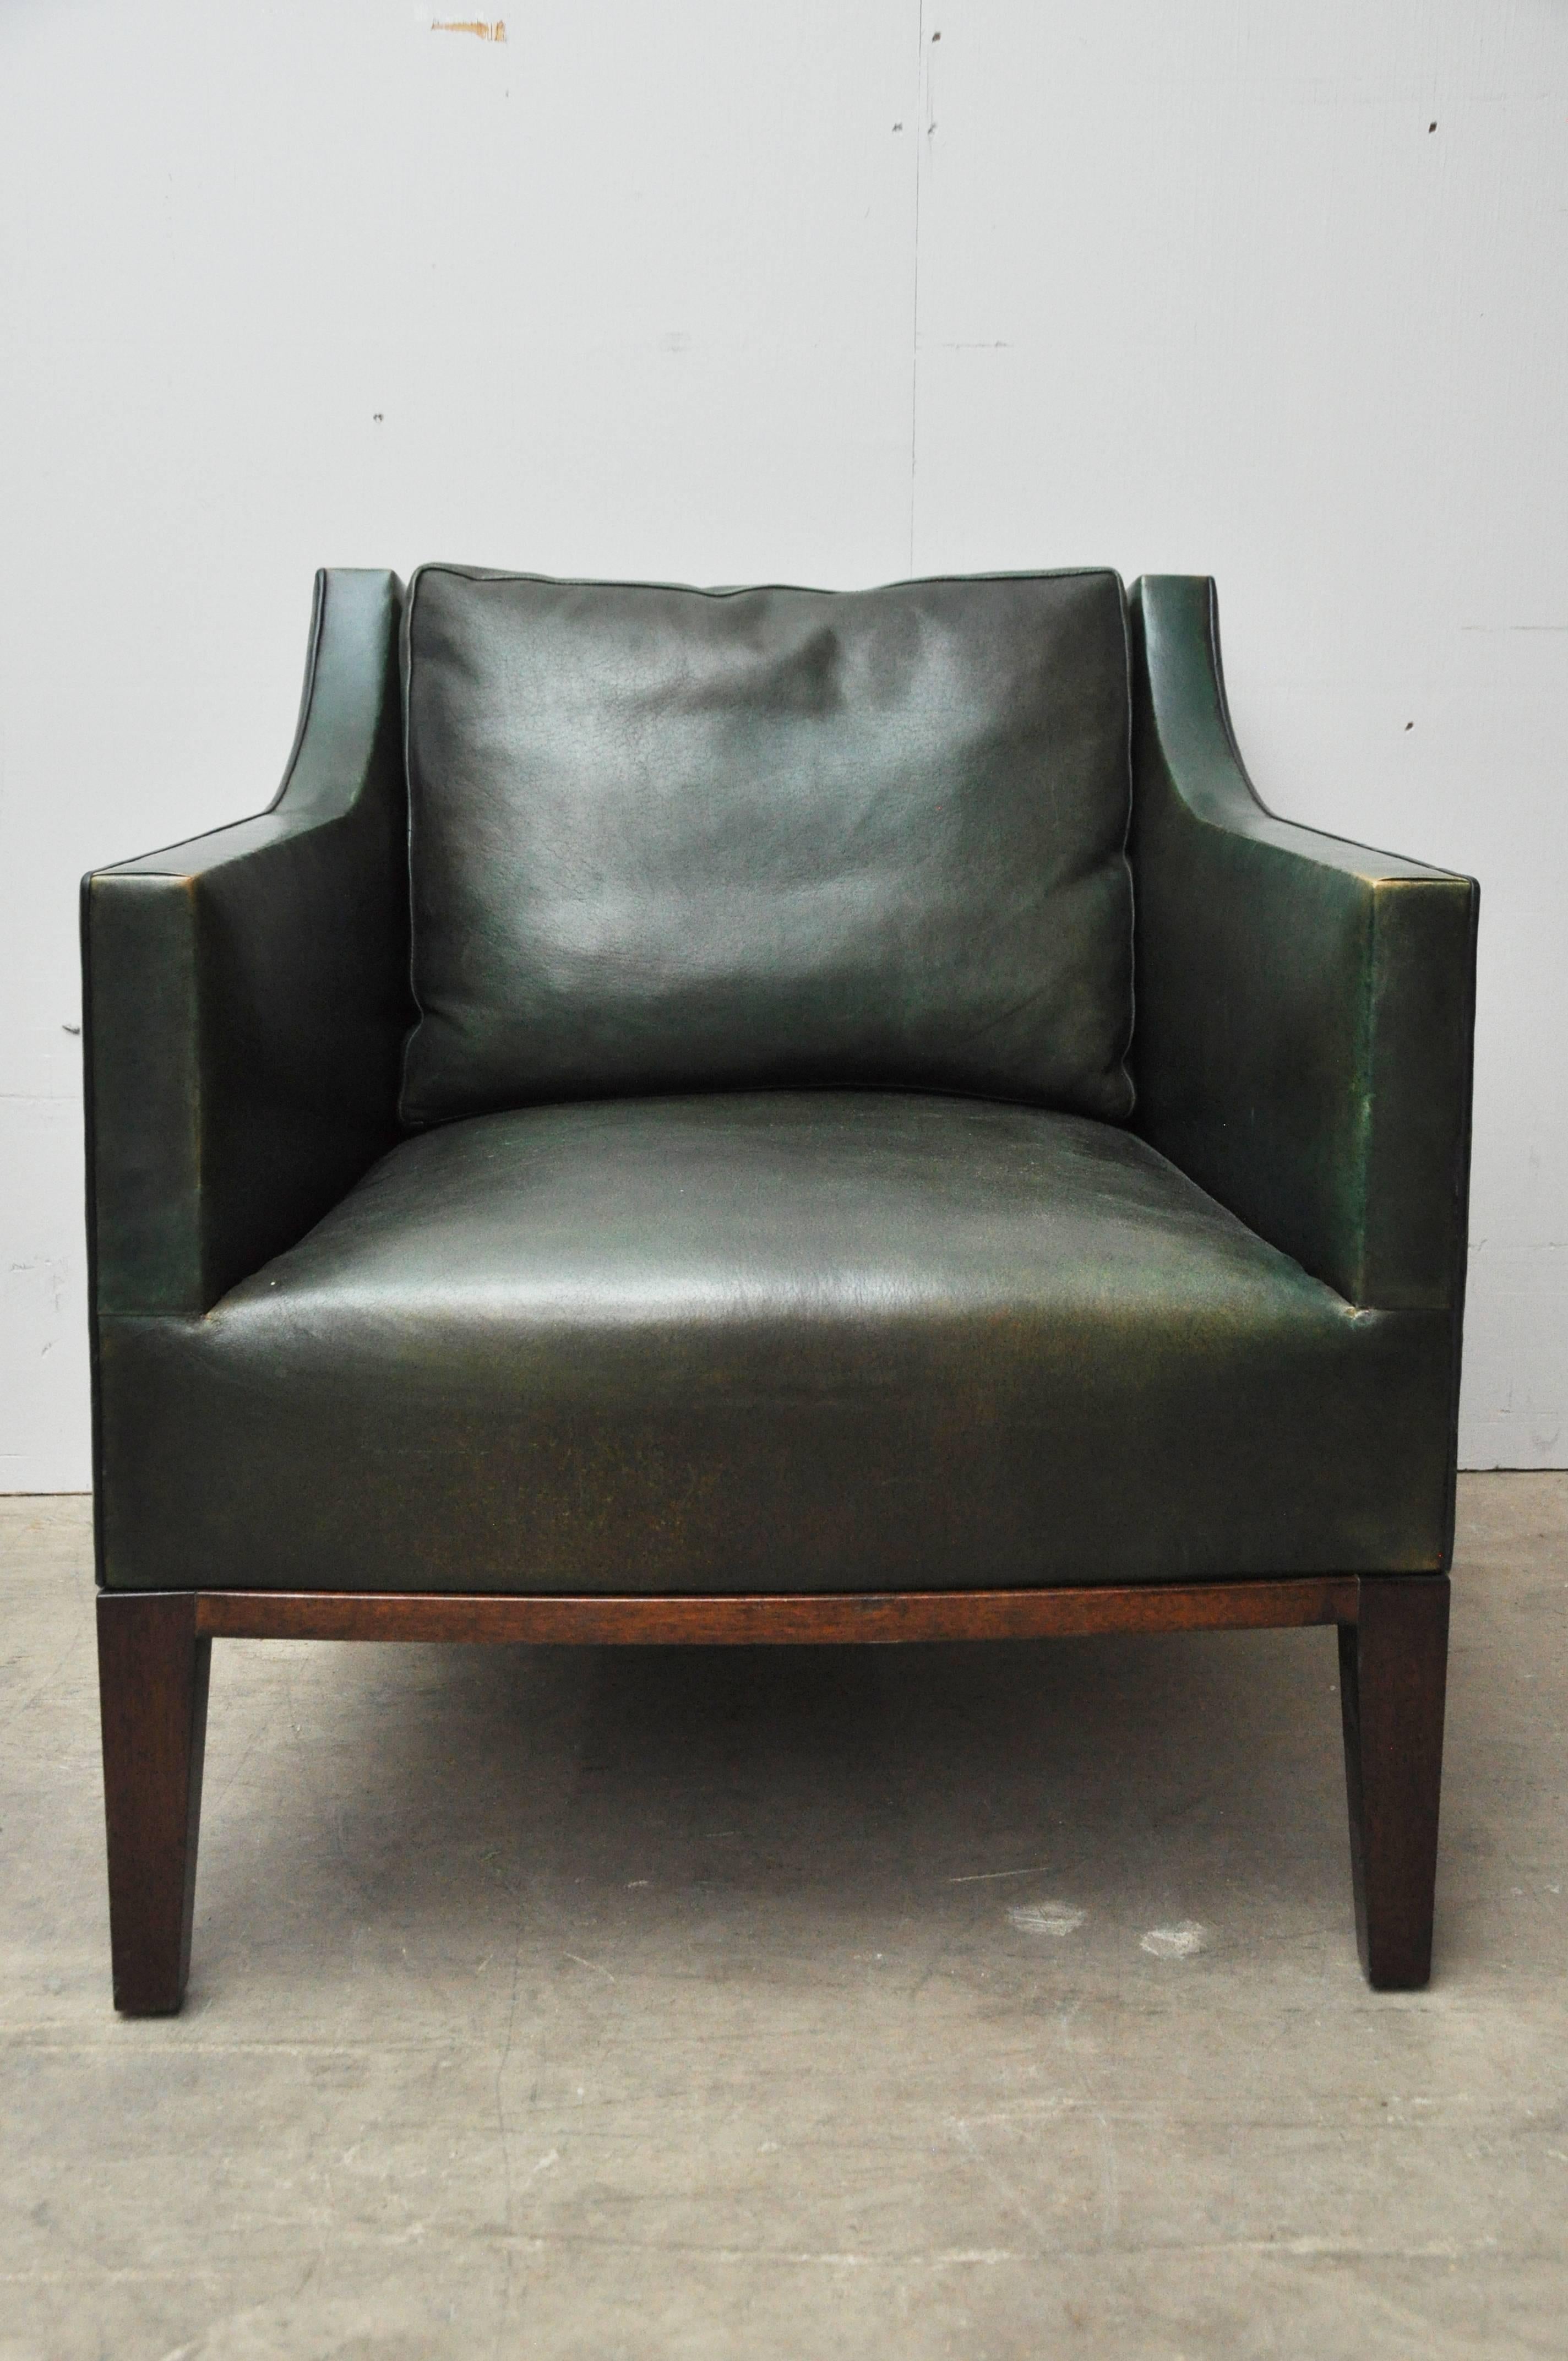 Sophisticated Dessin Fournir Lehigh chair manufactured by Gerard. There are four of these available upholstered in green leather. Seat height is 15.5